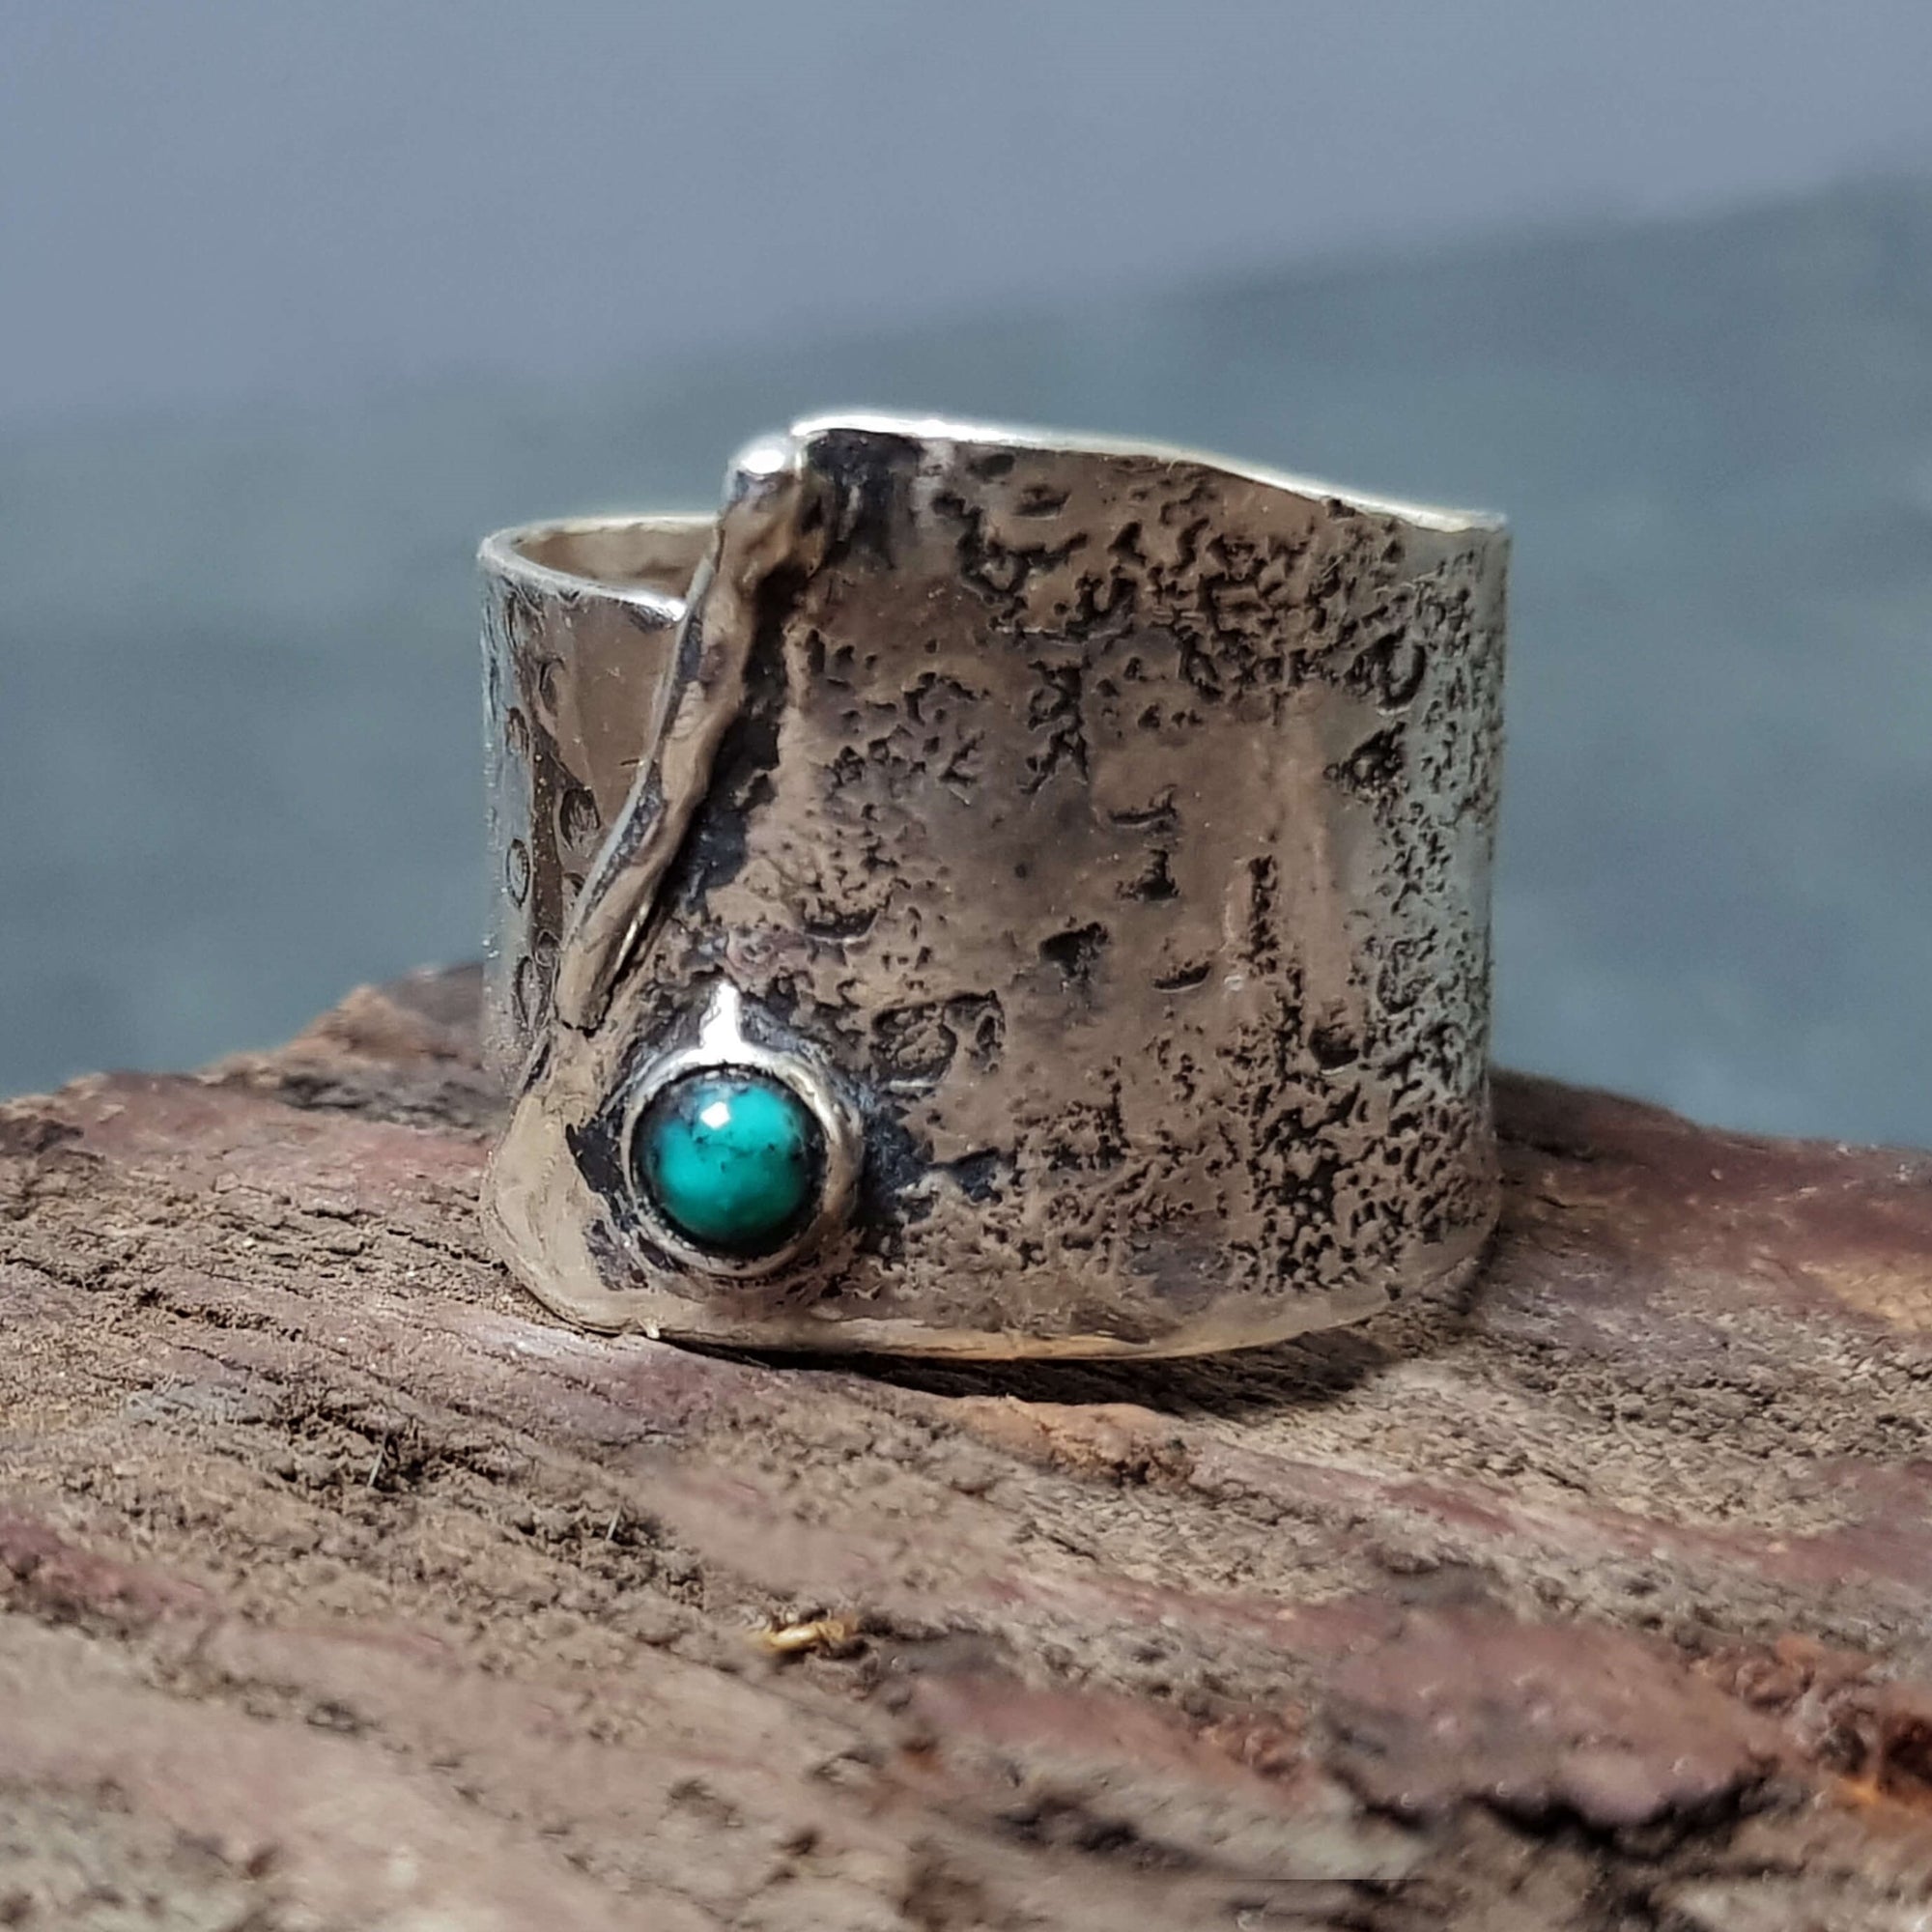 Turquoise Ring Vintage Style - Handcrafted in Nepal - DharmaShop